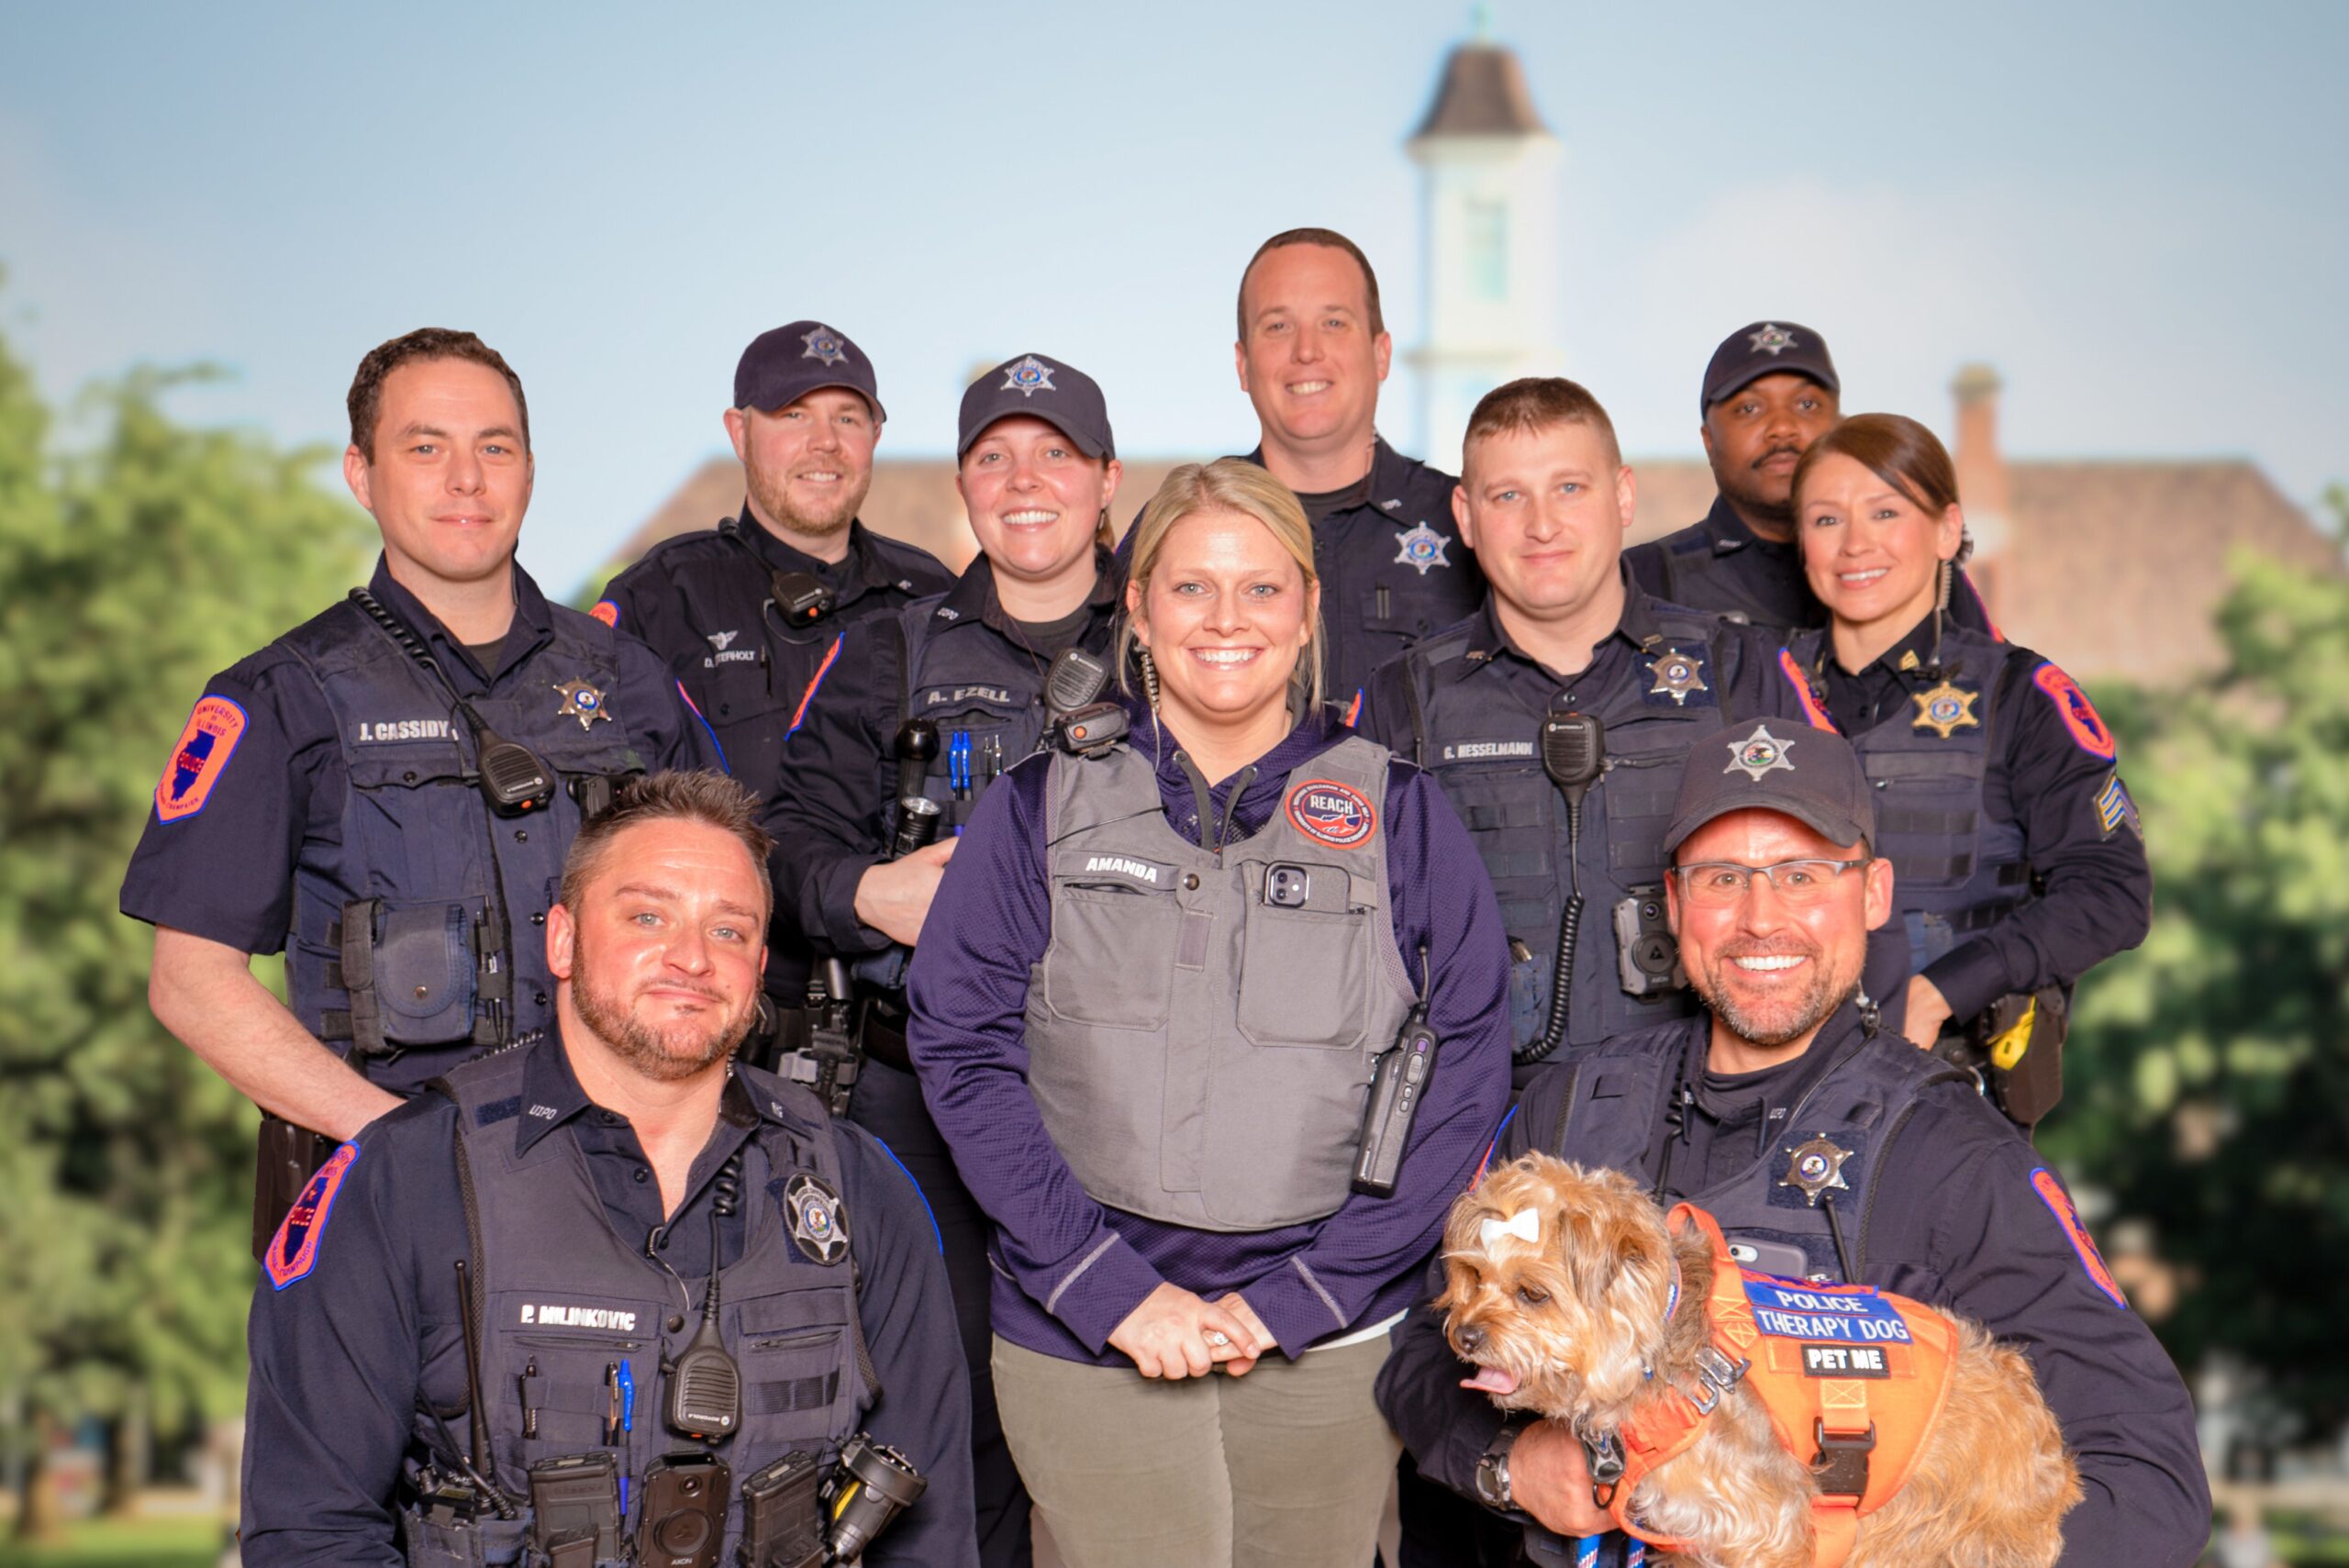 A smiling group of Division of Public Safety employees pose for a photo with the Illini Union in the background.